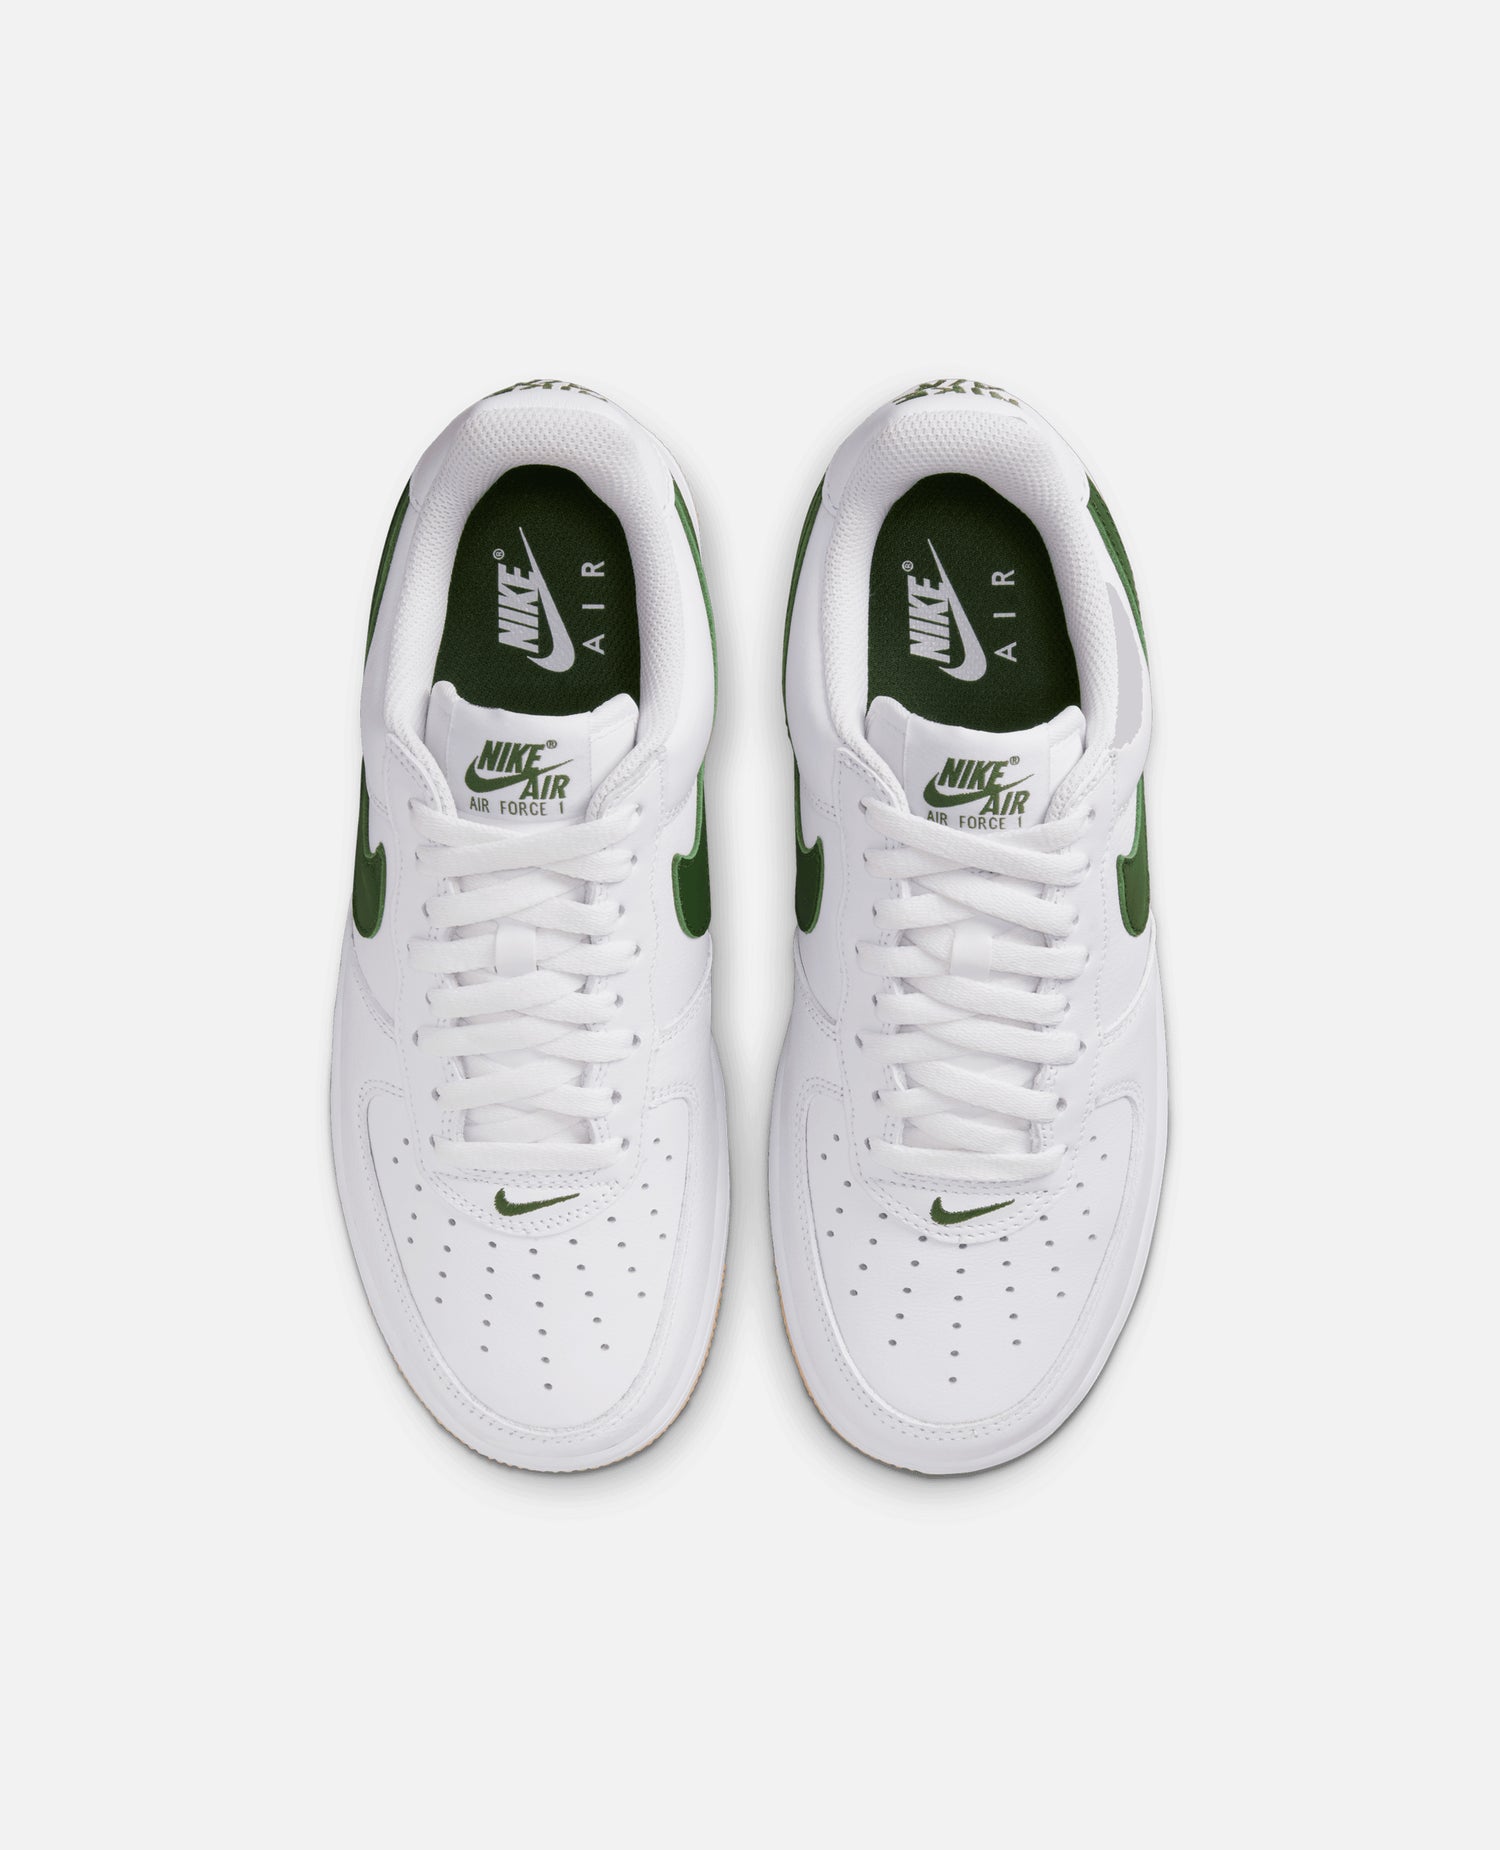 Nike Air Force 1 Low Retro (White/Forest Green-Gum Yellow)